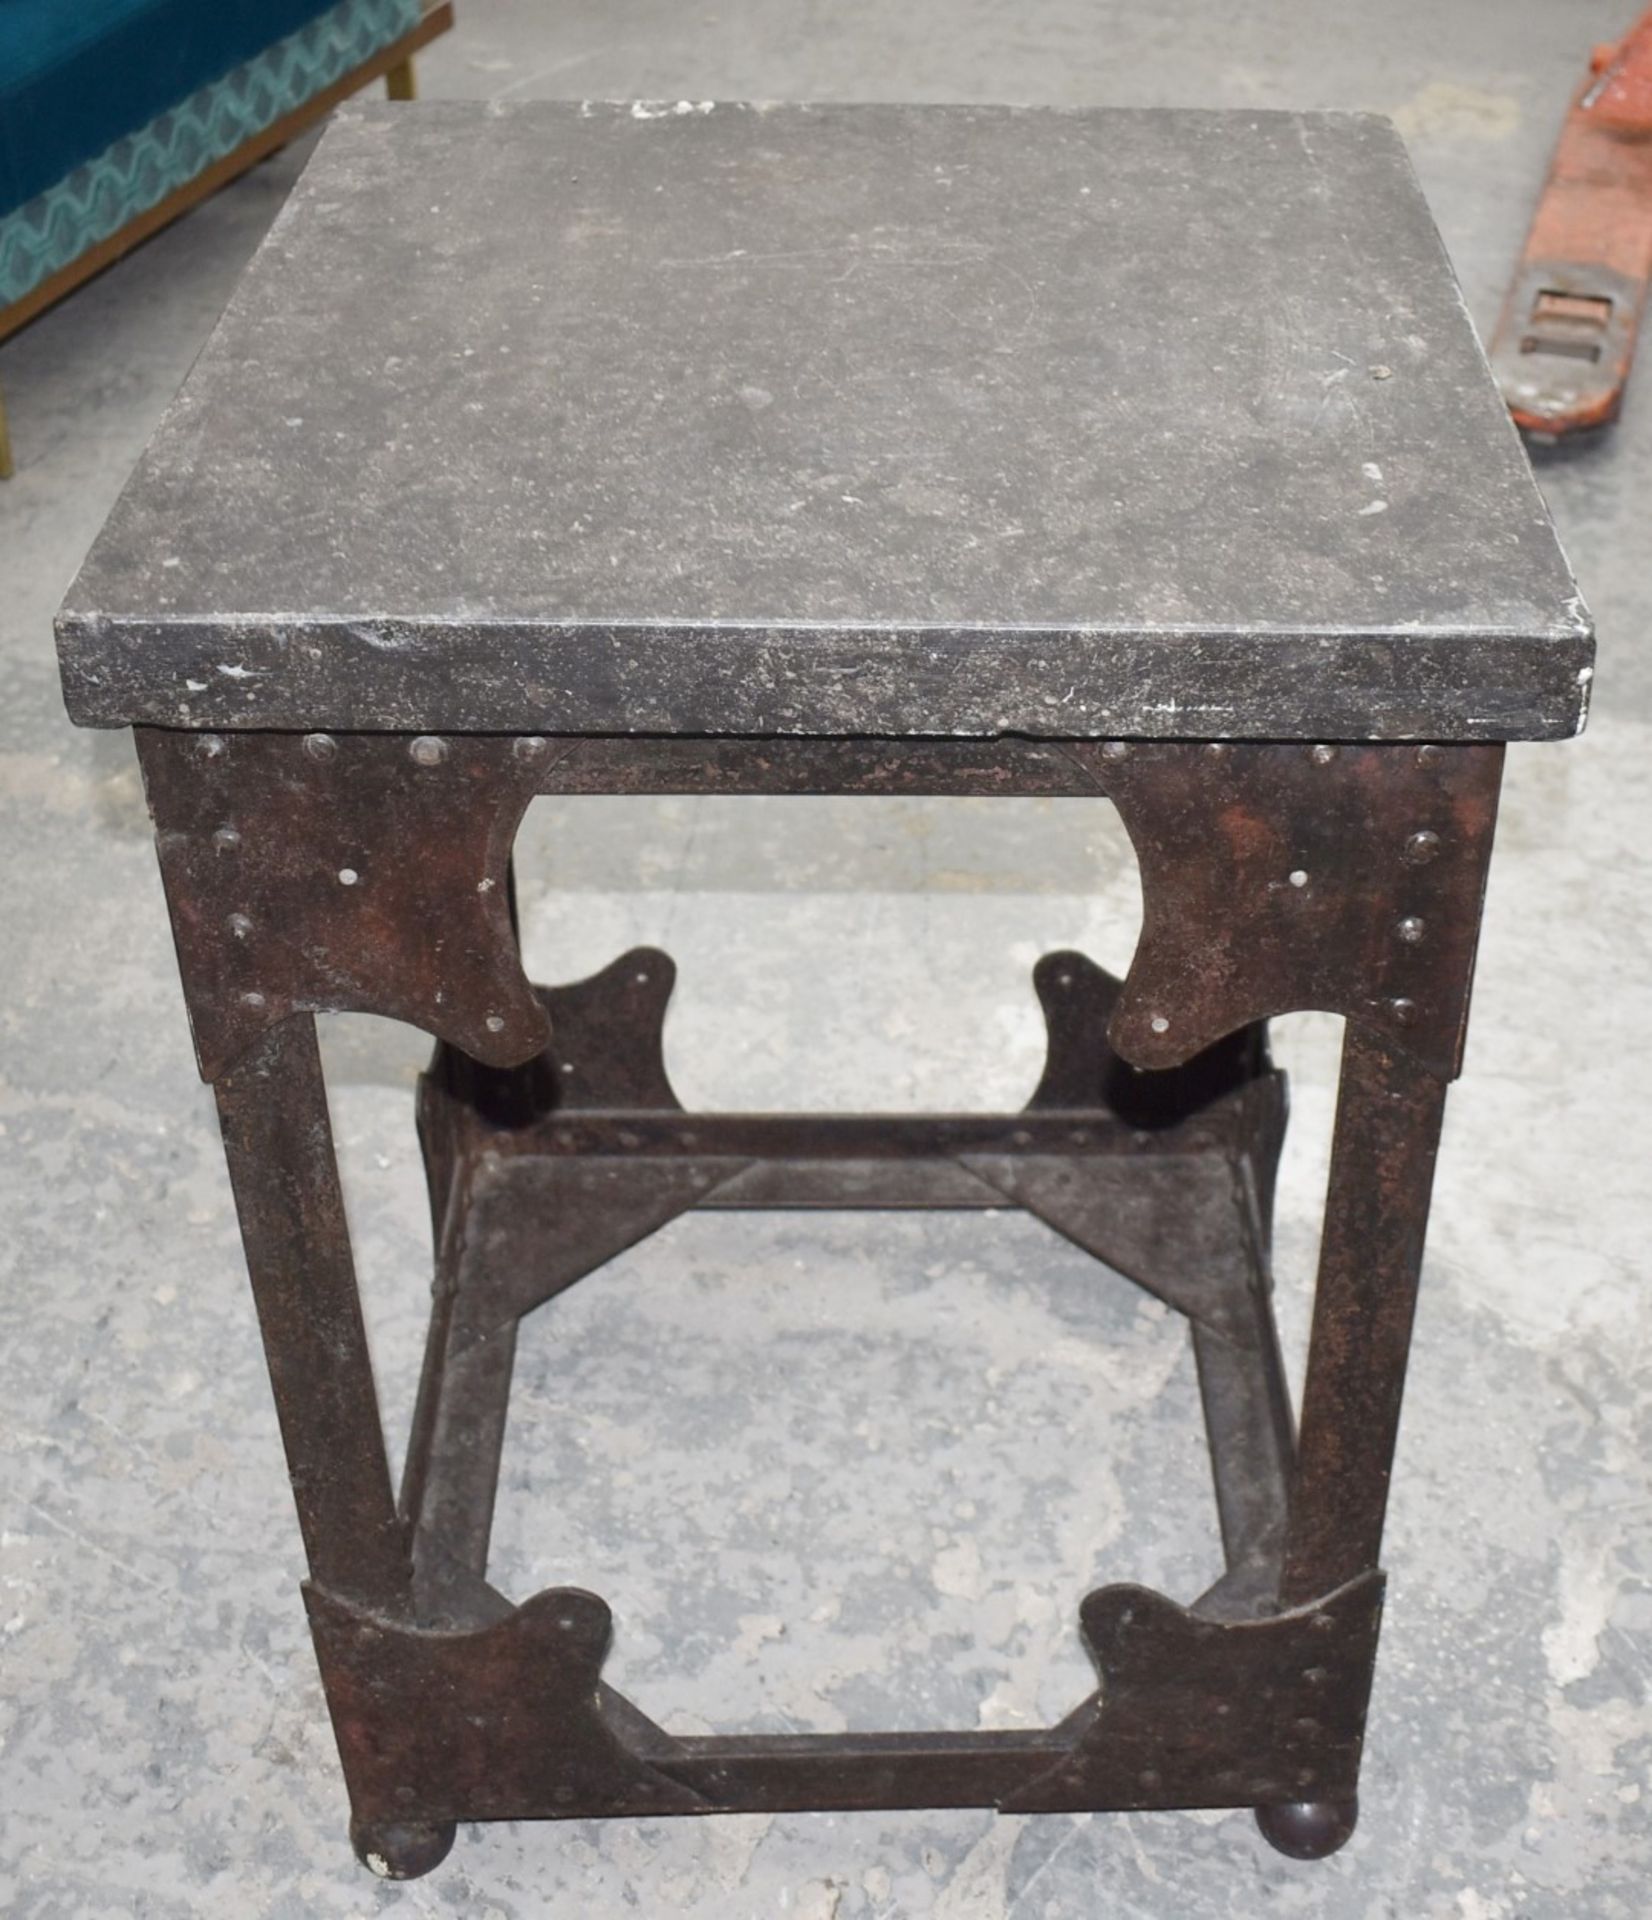 1 x Vintage Butchers Block With Riveted Steel Base, Utensil Hanging Rail and Heavy Stone Block Top - Image 9 of 11